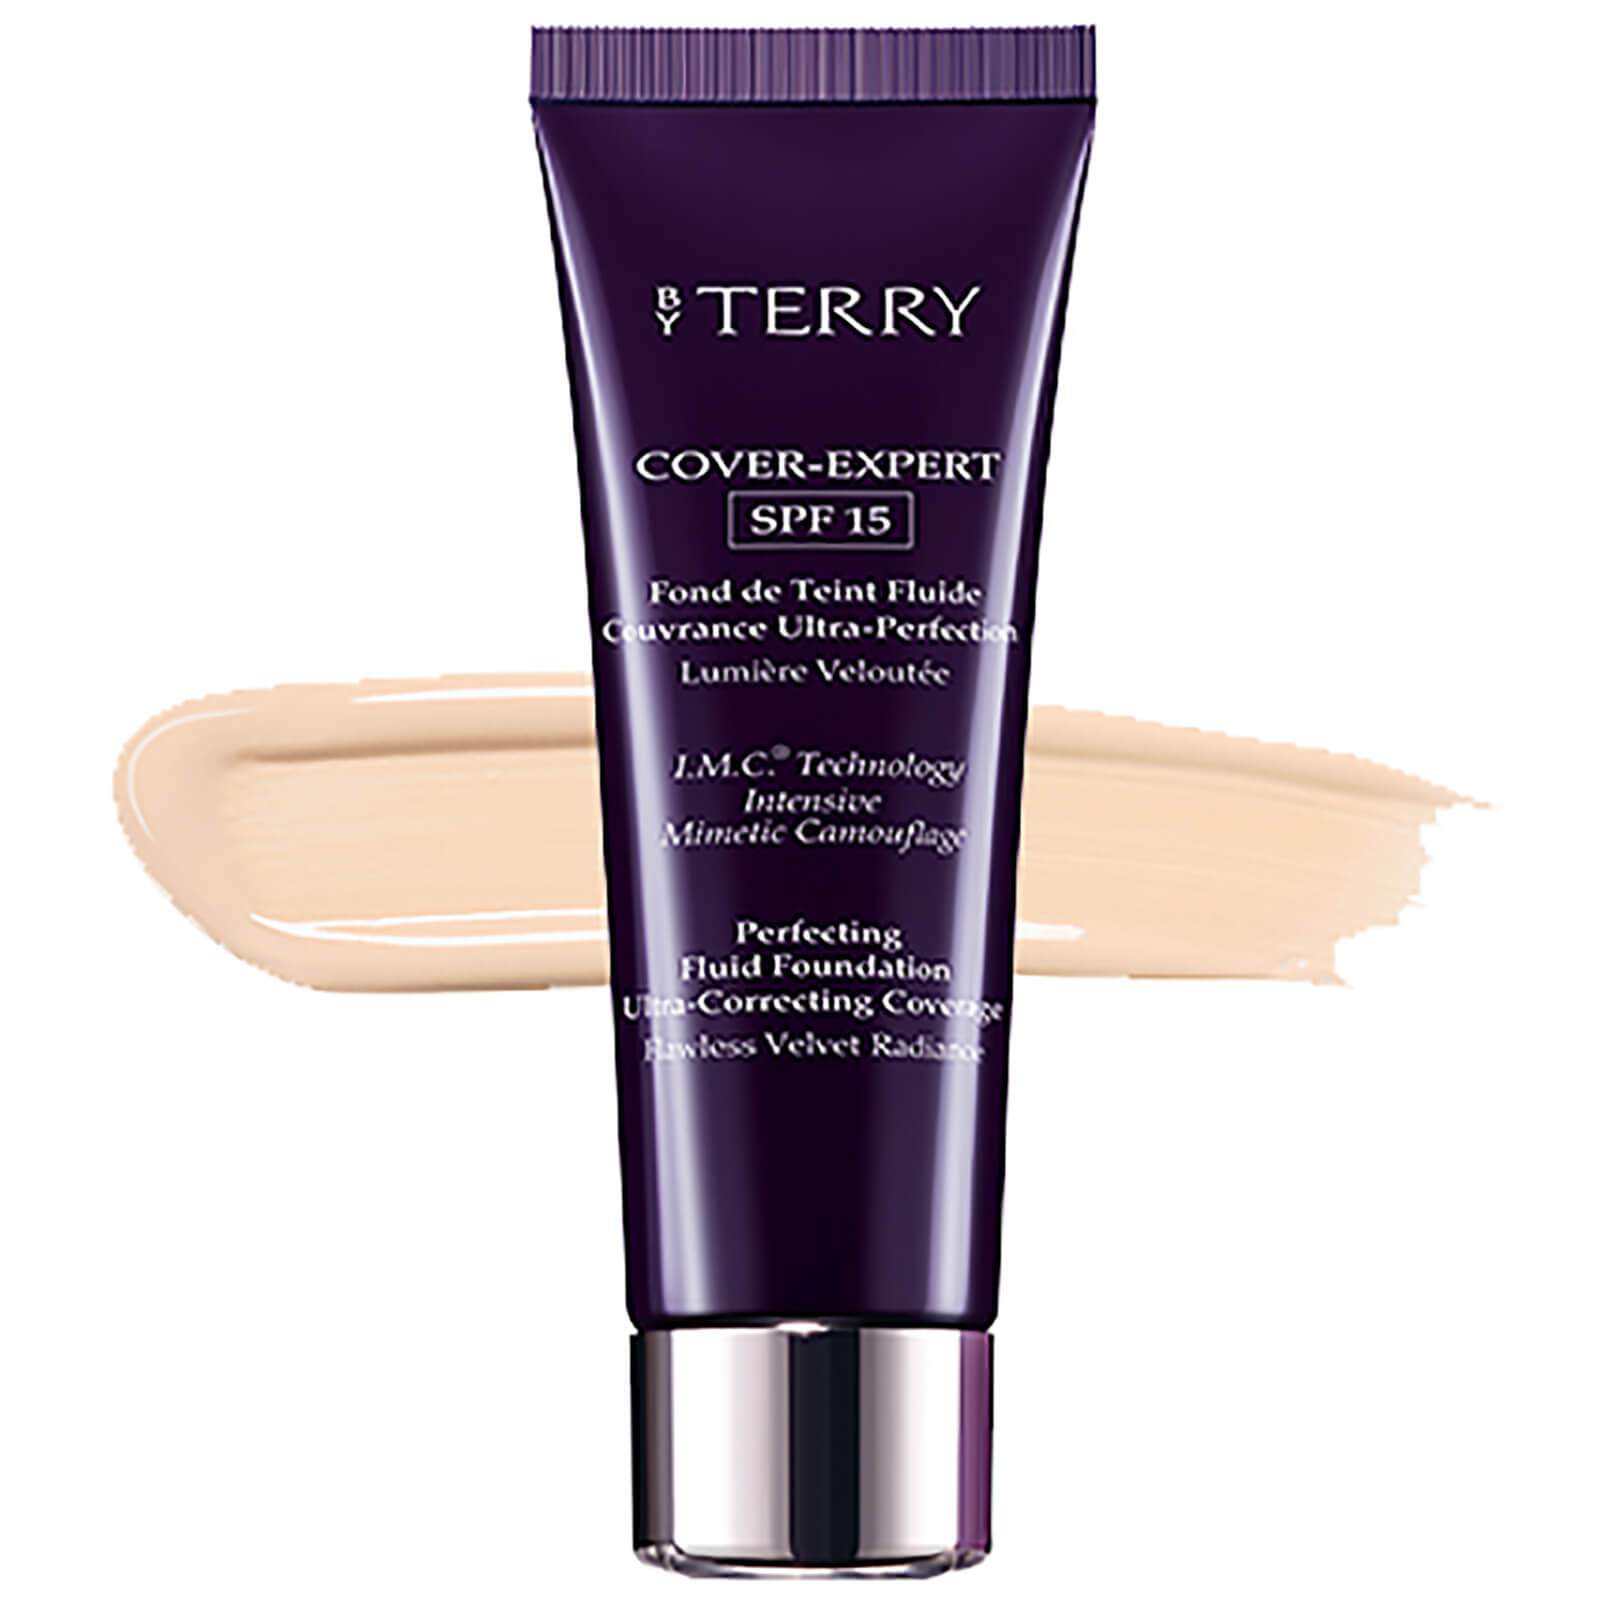 By Terry Cover-Expert Foundation SPF15 35ml (Various Shades) - 6 2. Neutral Beige